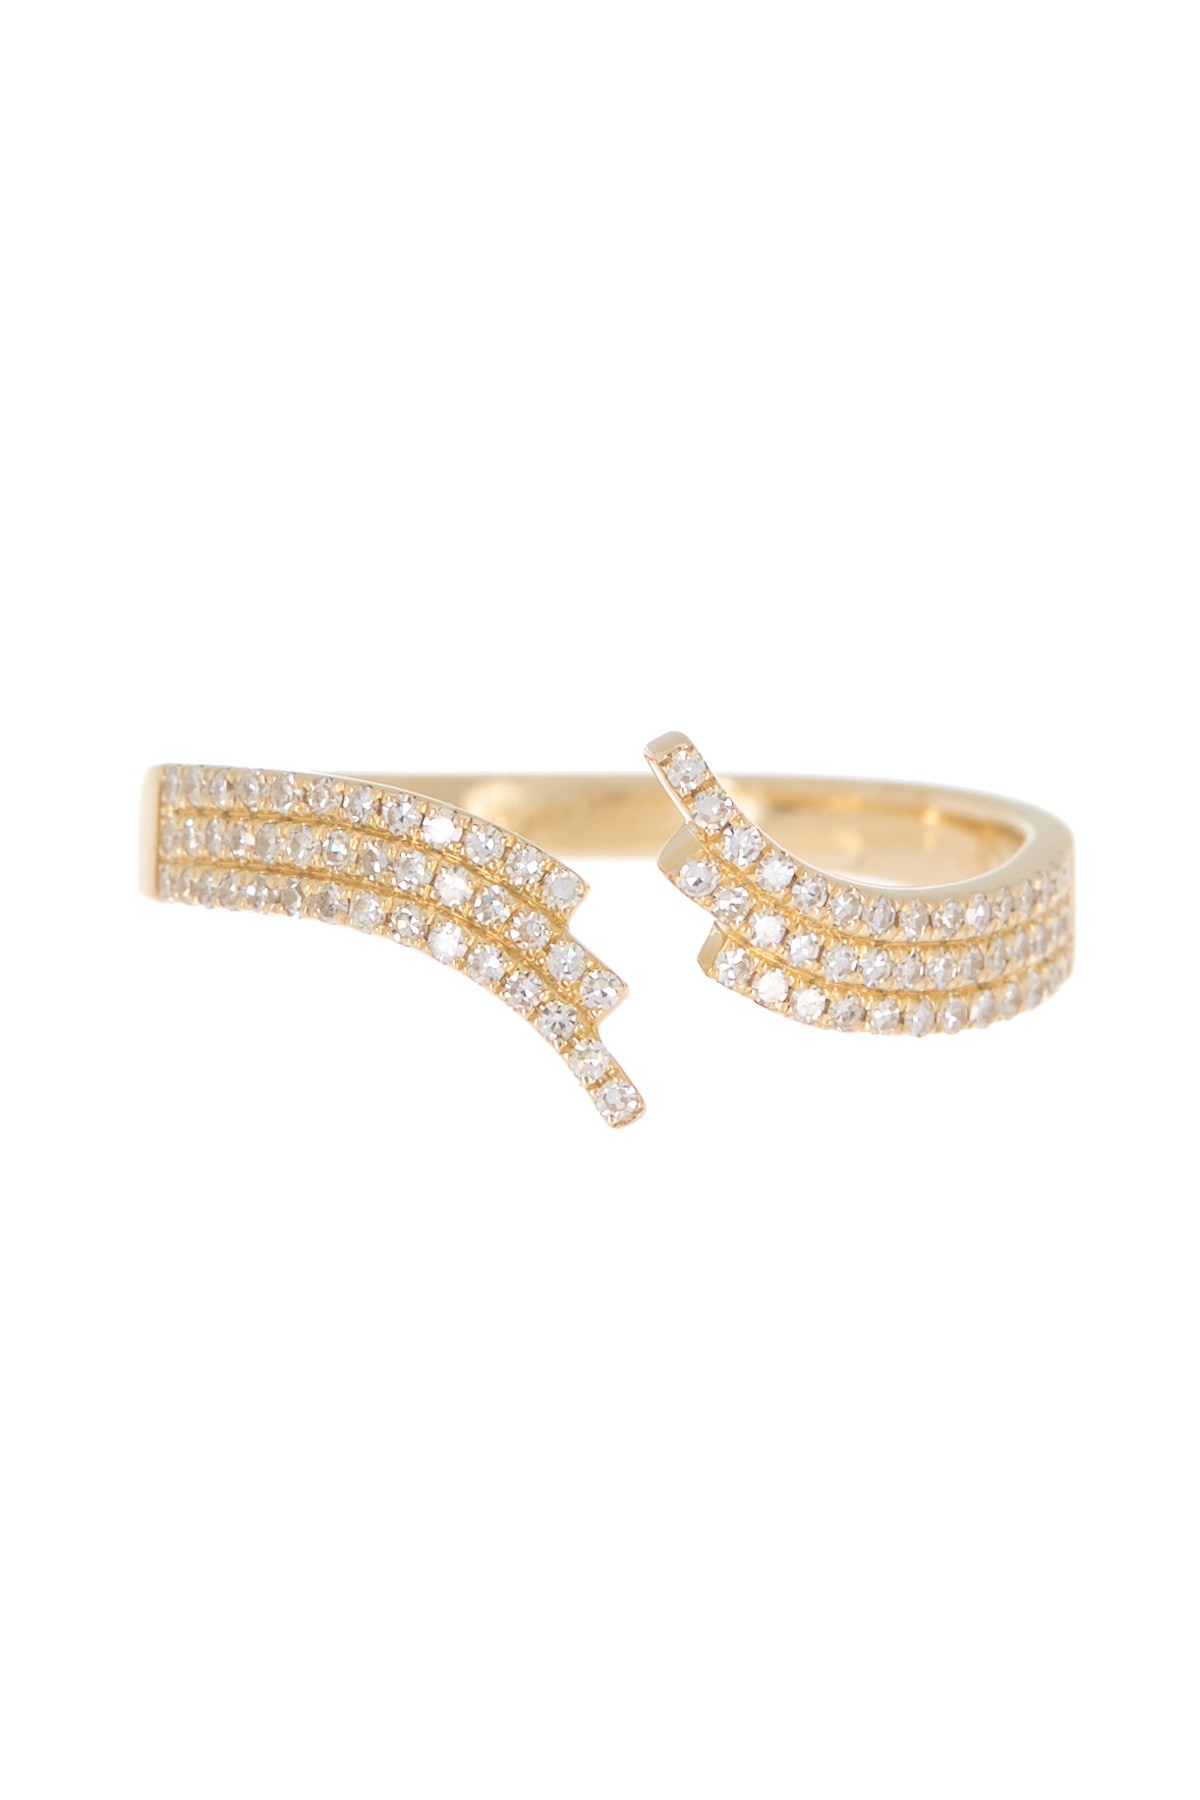 Willow 14K Yellow Gold Pave Diamond Bypass Ring - Size 7 EF Collection